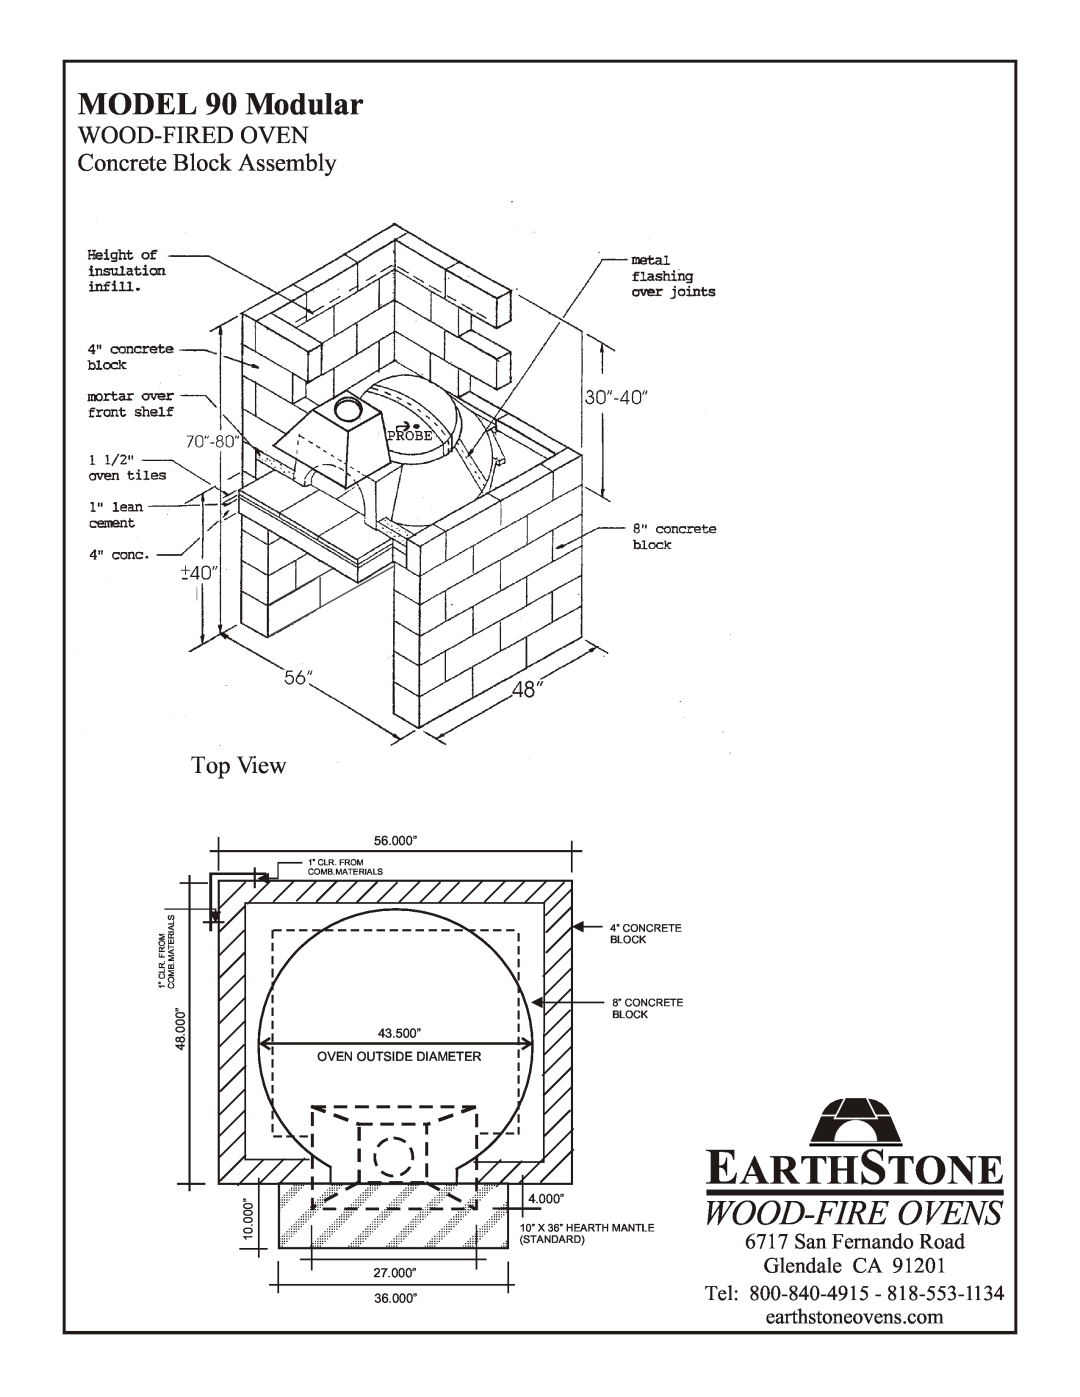 EarthStone WOOD-FIRED OVEN Concrete Block Assembly Top View, Earthstone, Wood-Fire Ovens, MODEL 90 Modular, 56.000” 